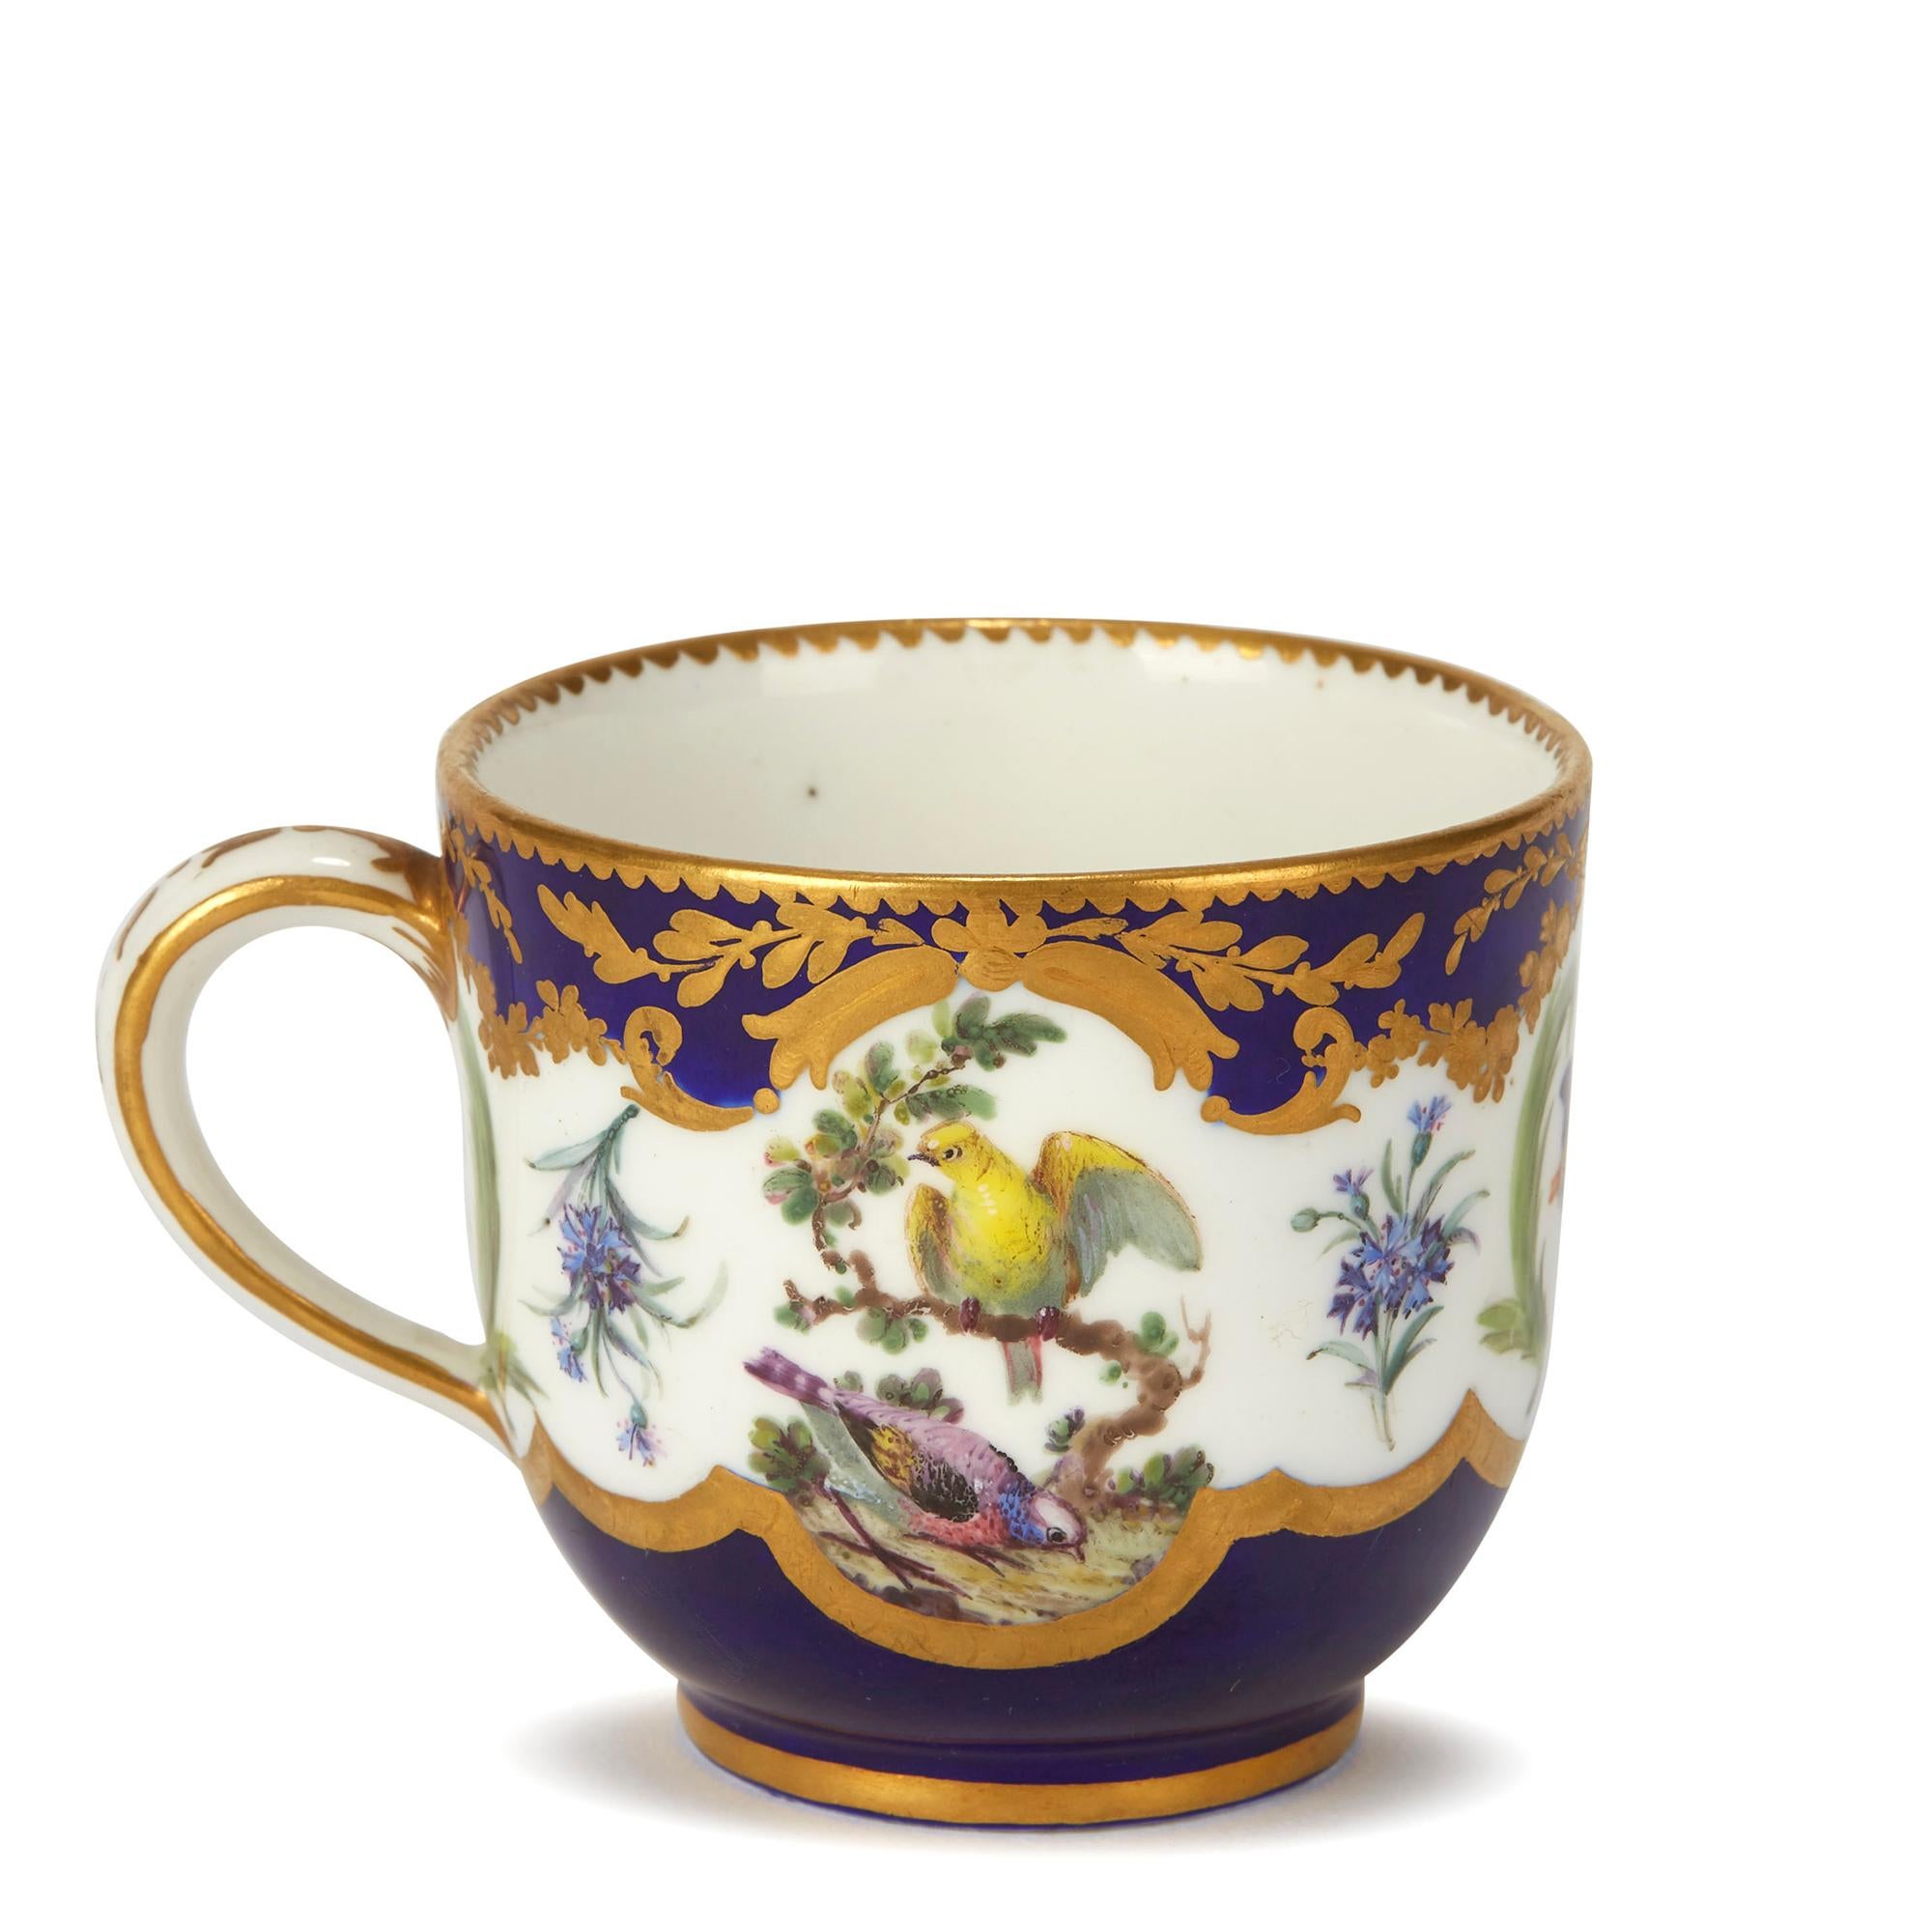 Sèvres French Porcelain Hand Painted and Gilded Teacup, circa 1752 1